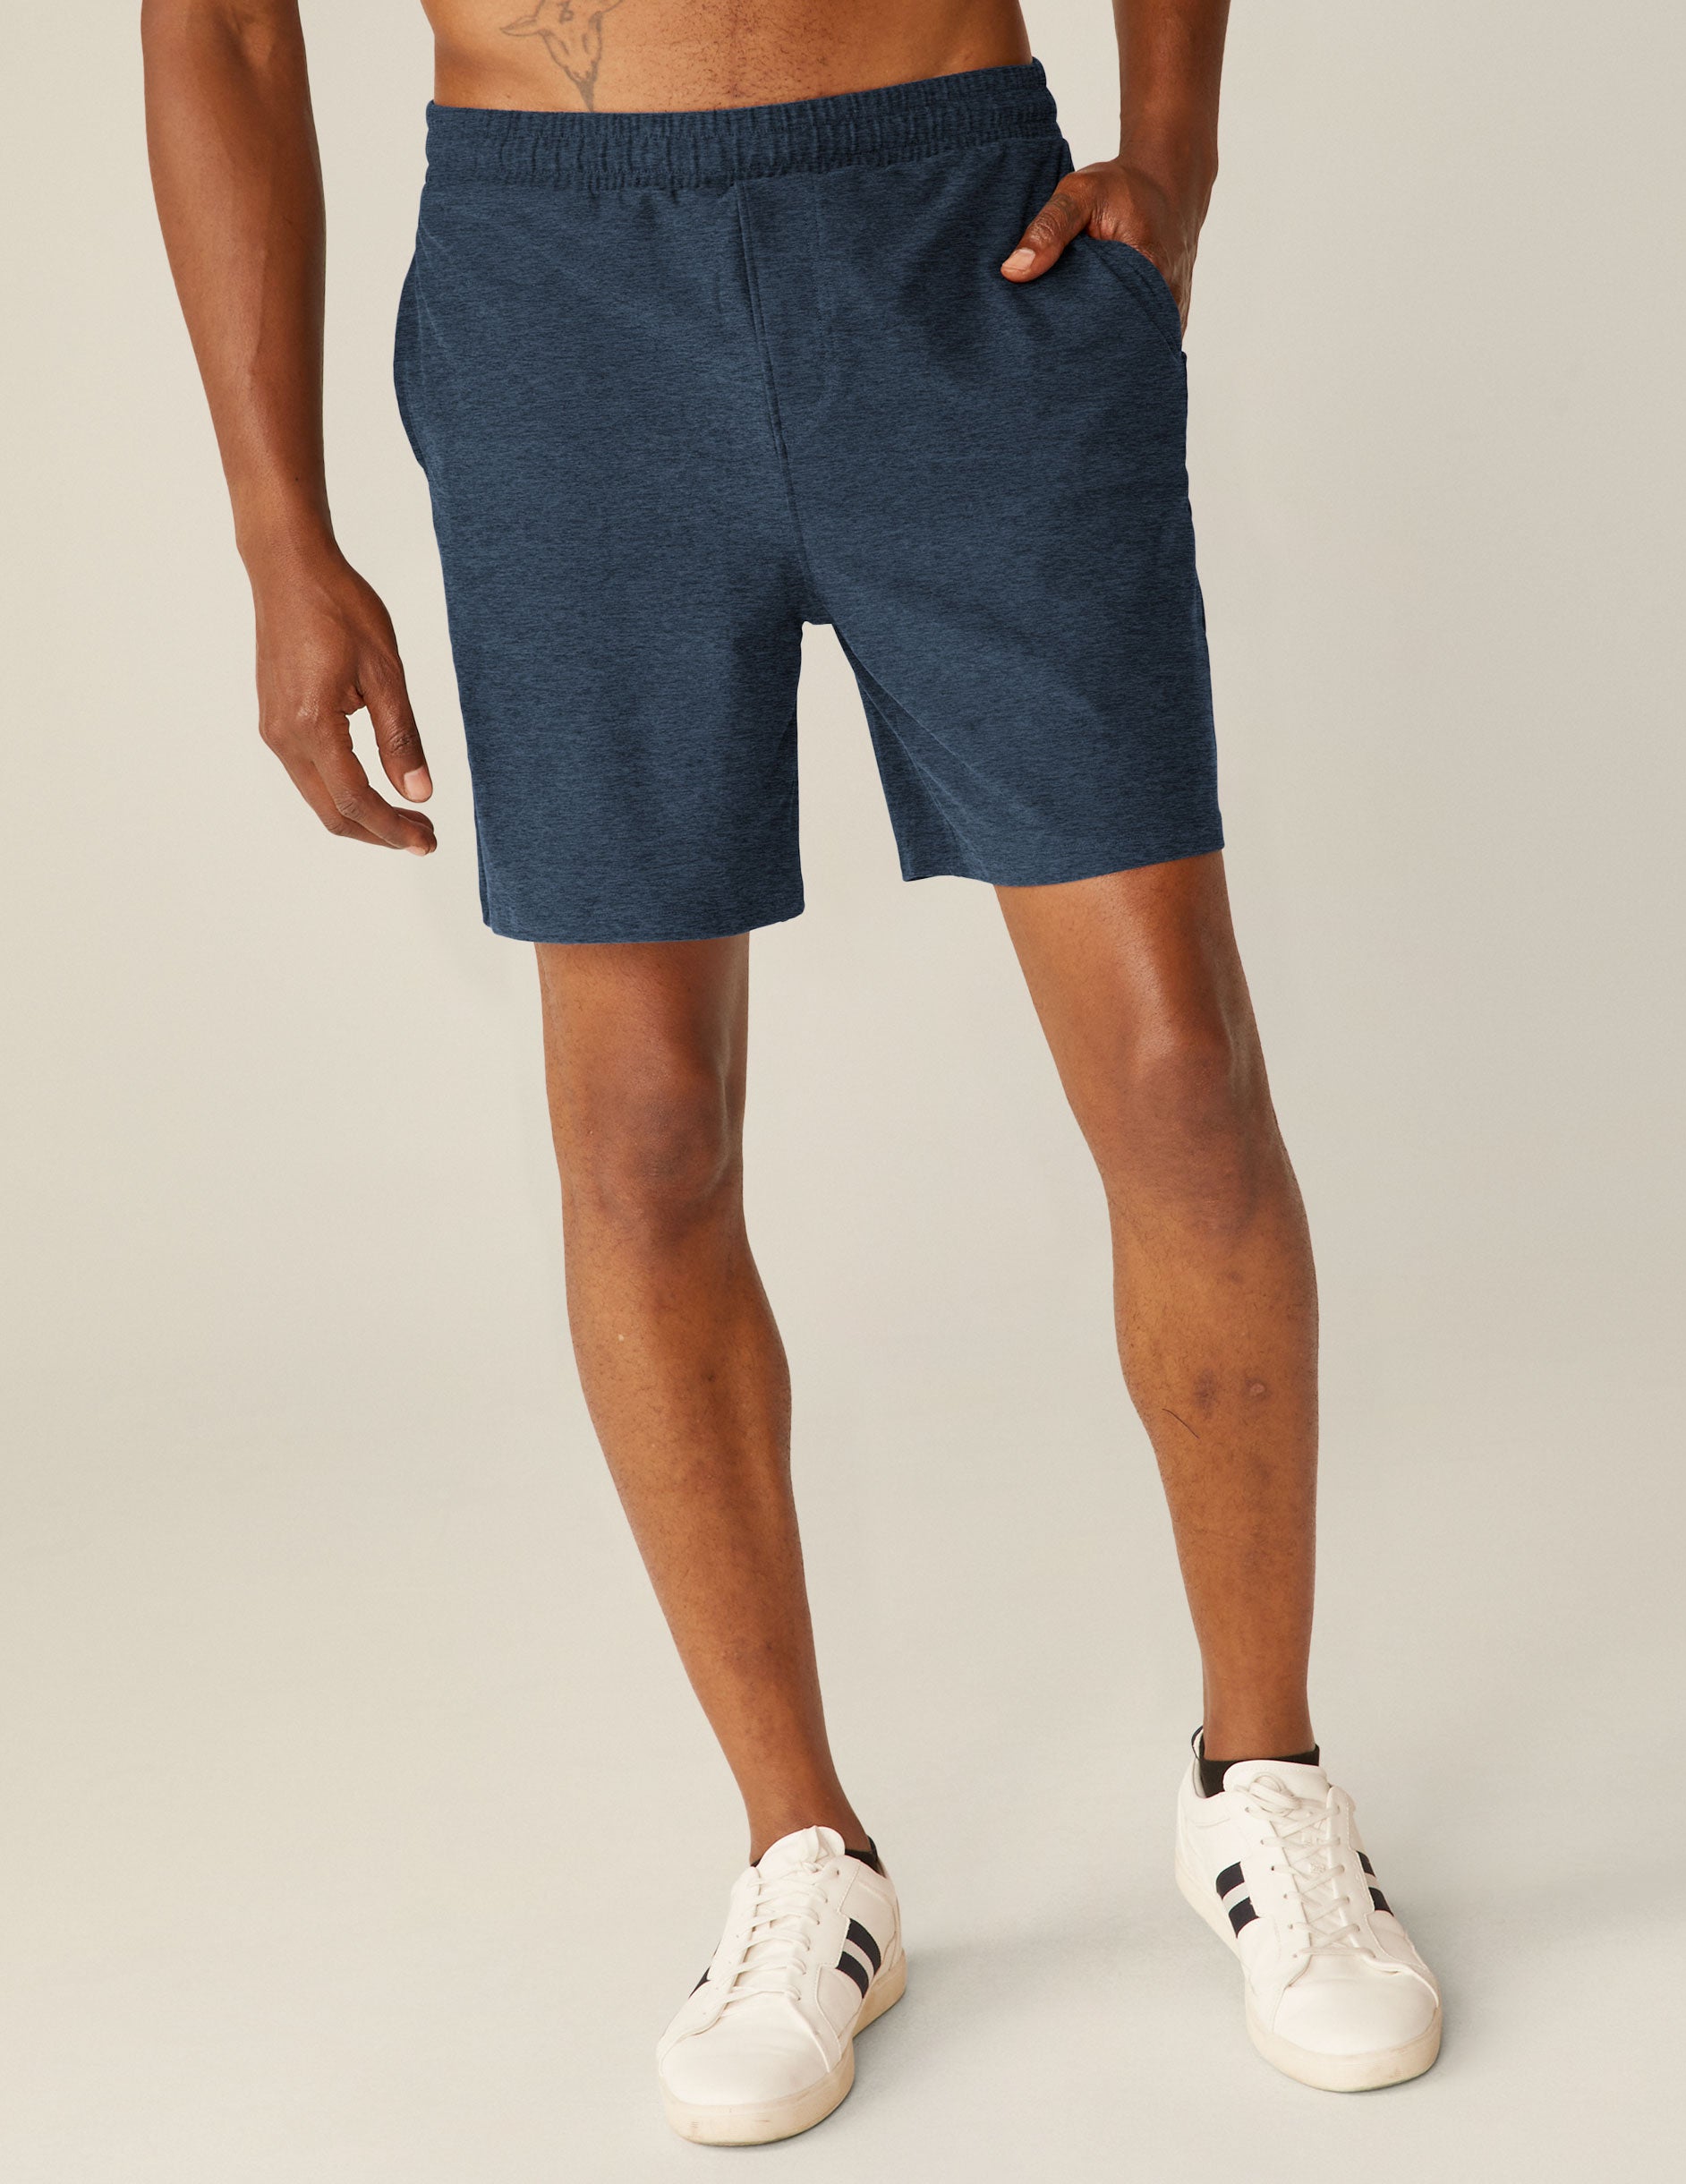 blue relaxed fit men's athleisure shorts with pockets.